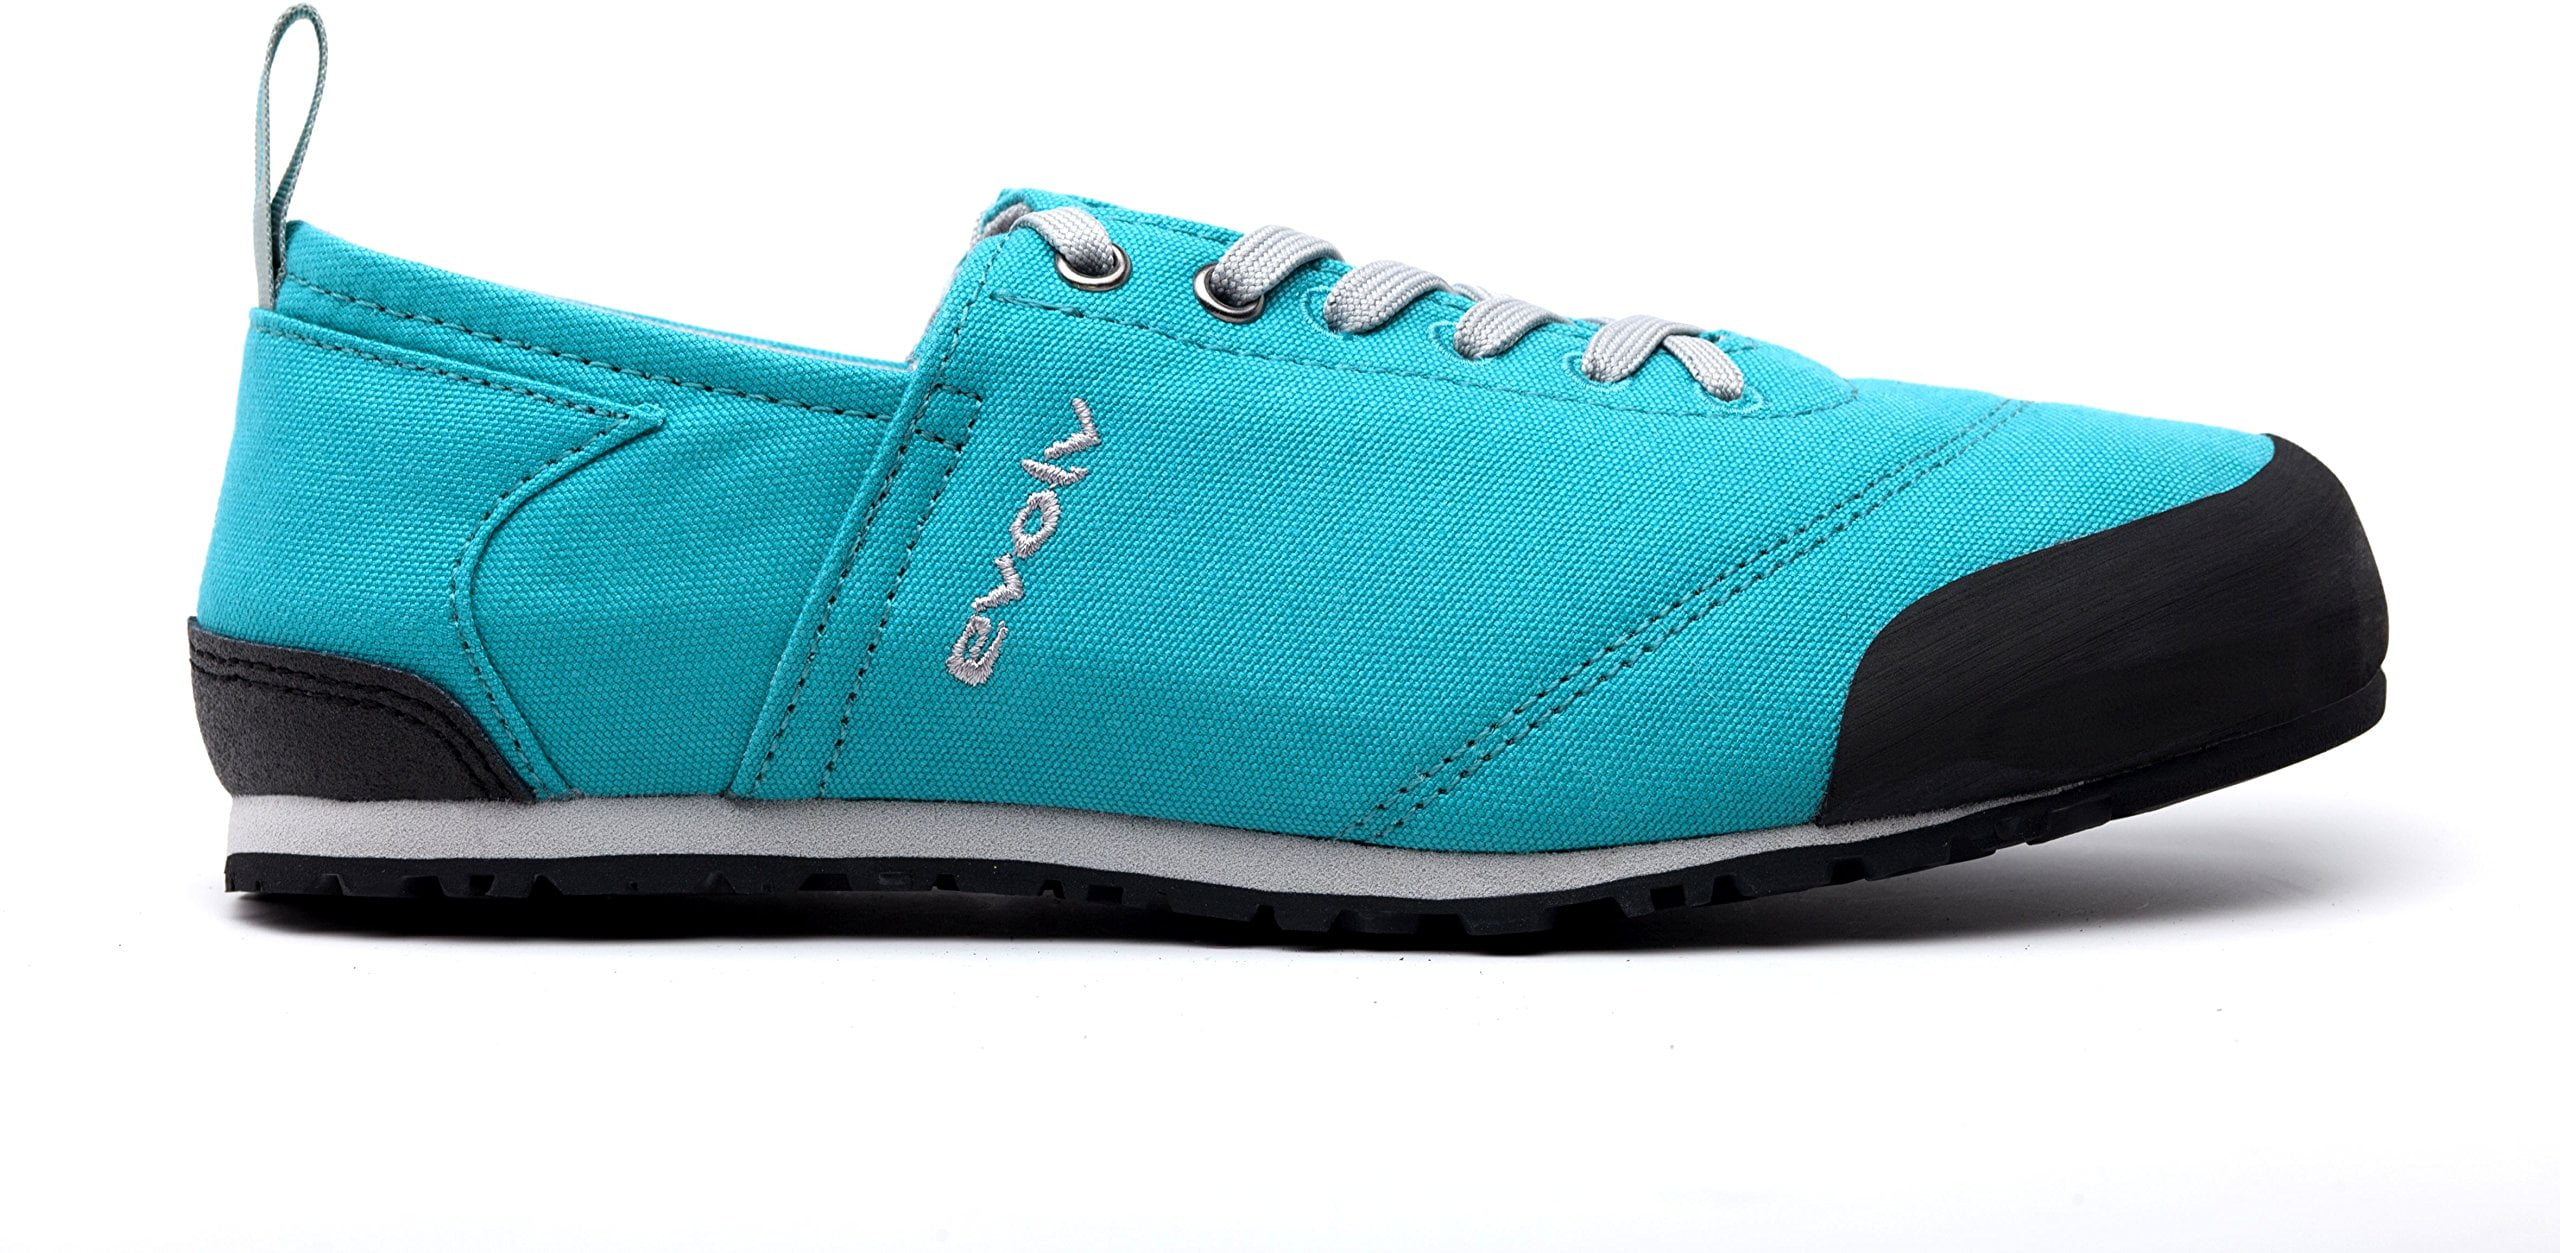 Evolv Cruzer Shoe Women's Turquoise Size 8 NEW Outdoor Casual Performance 